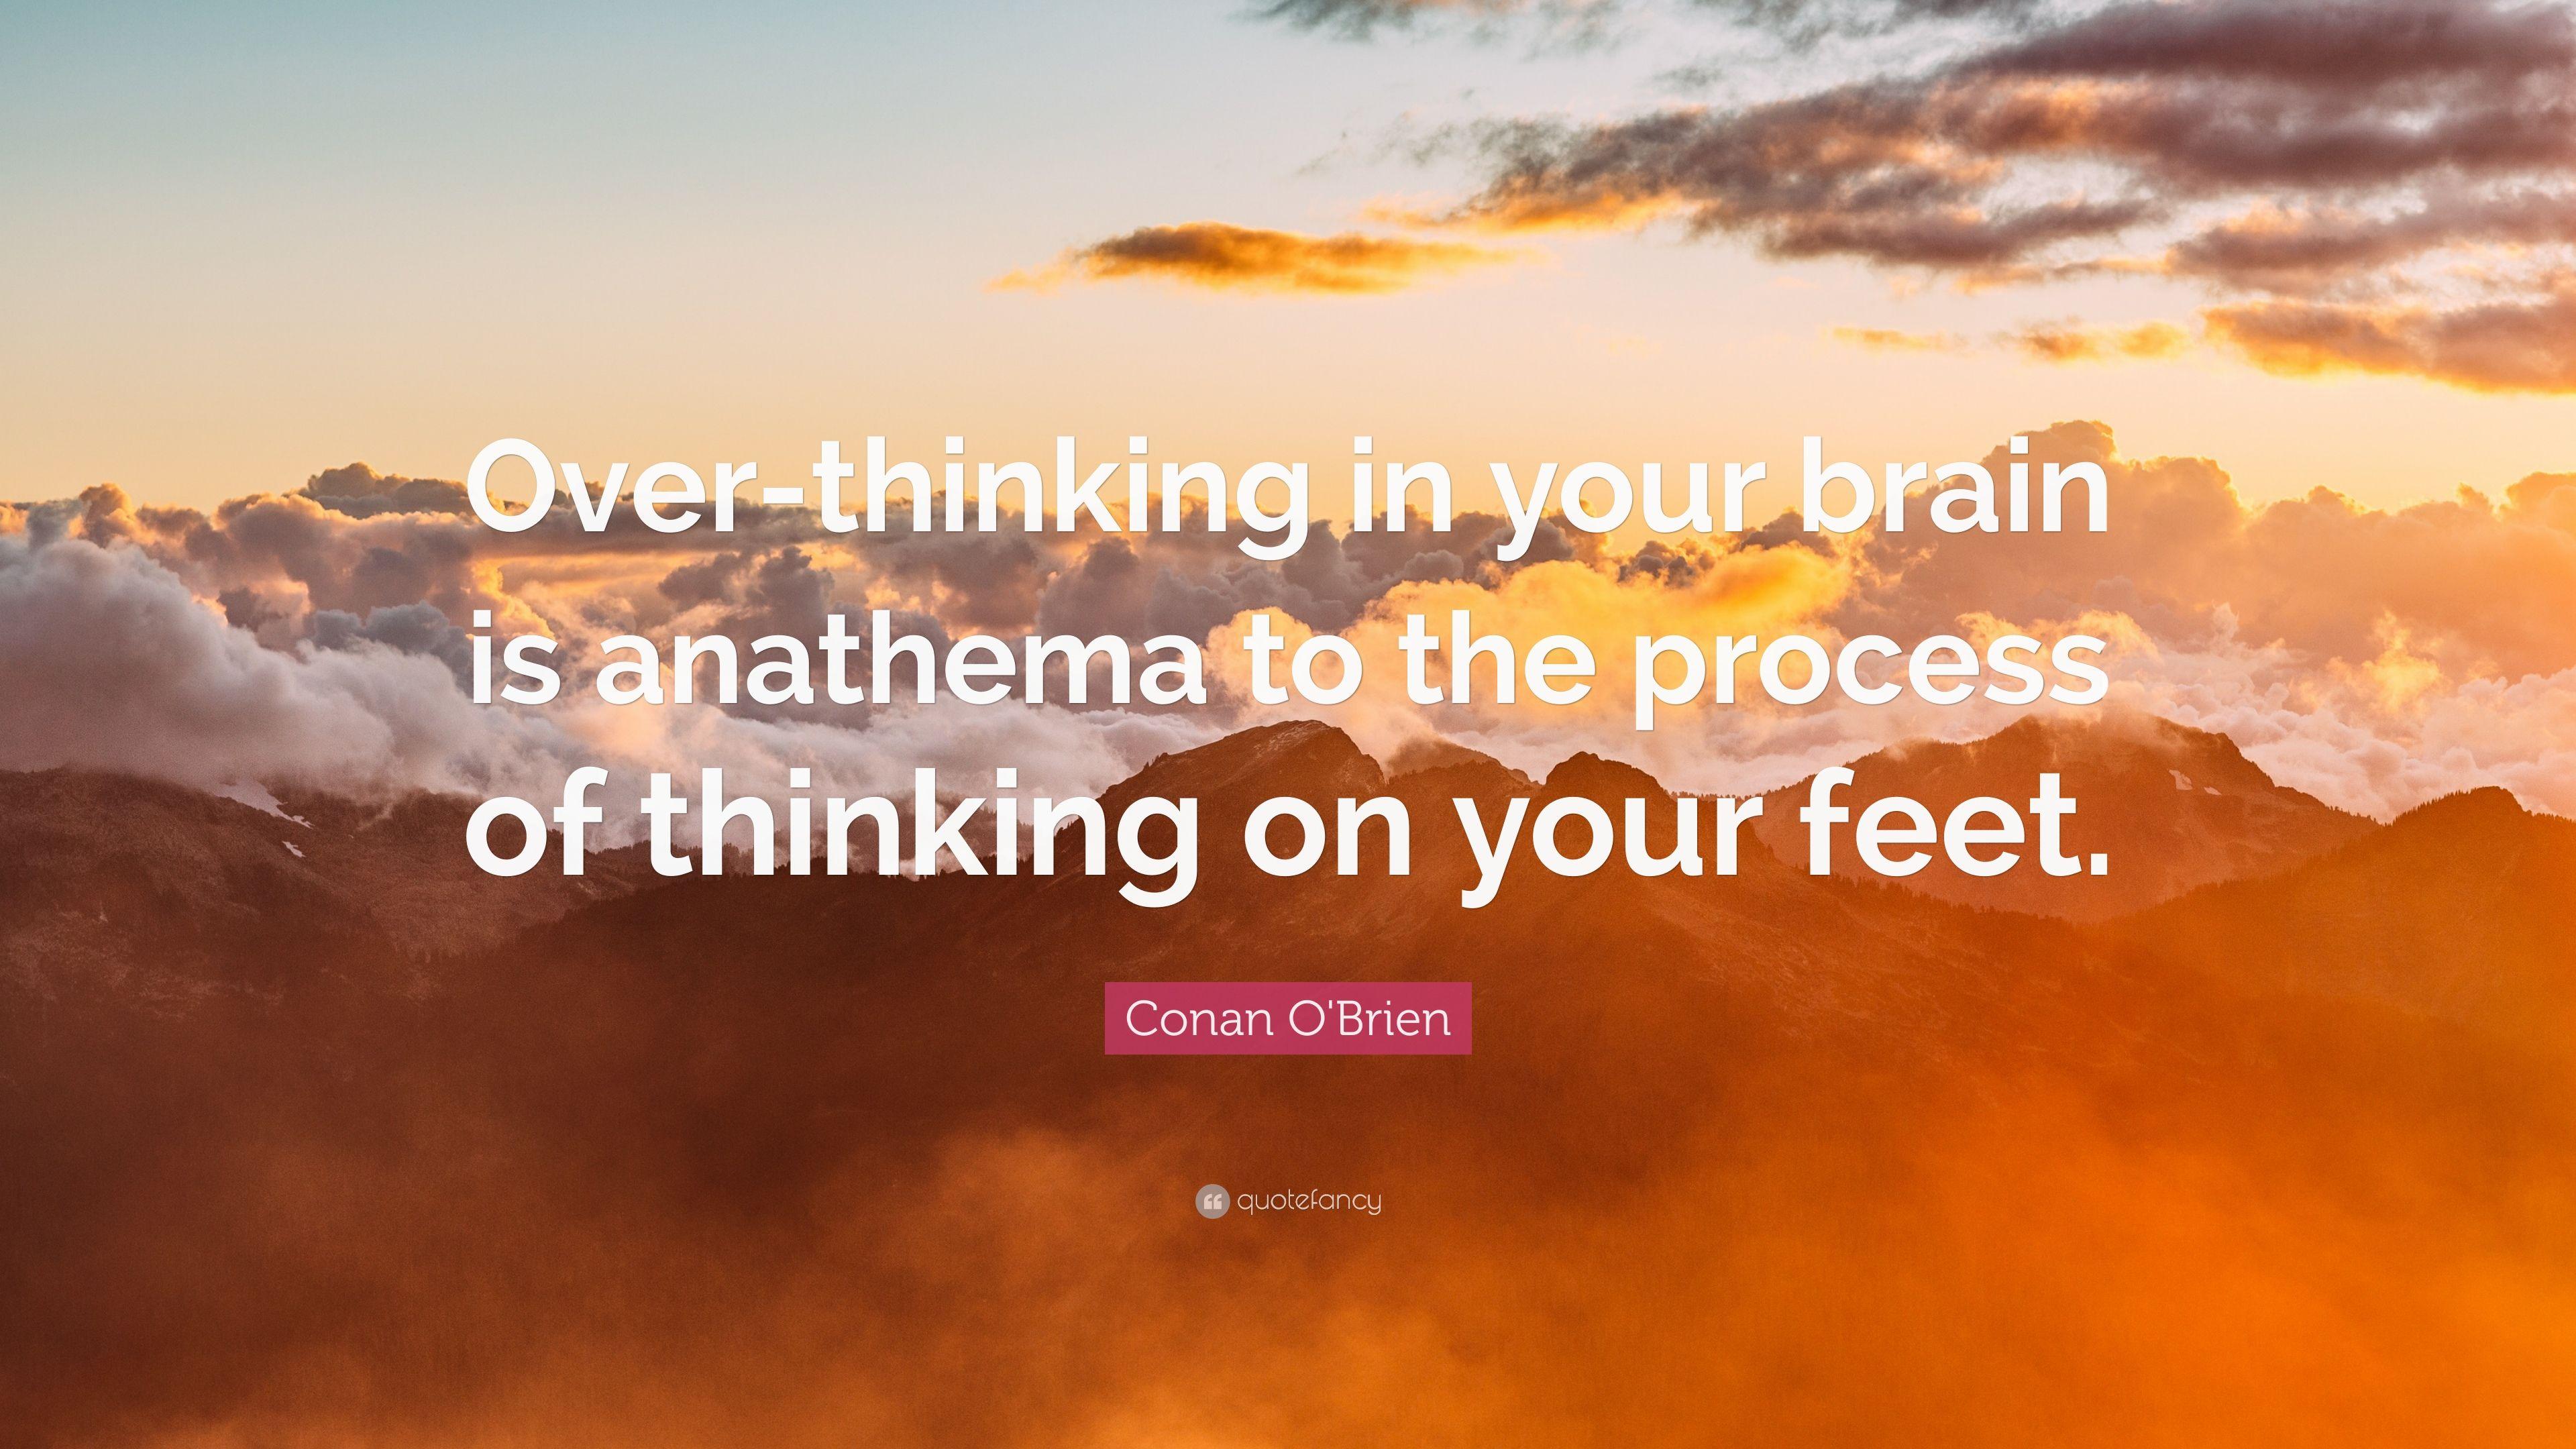 Conan O'Brien Quote: “Over Thinking In Your Brain Is Anathema To